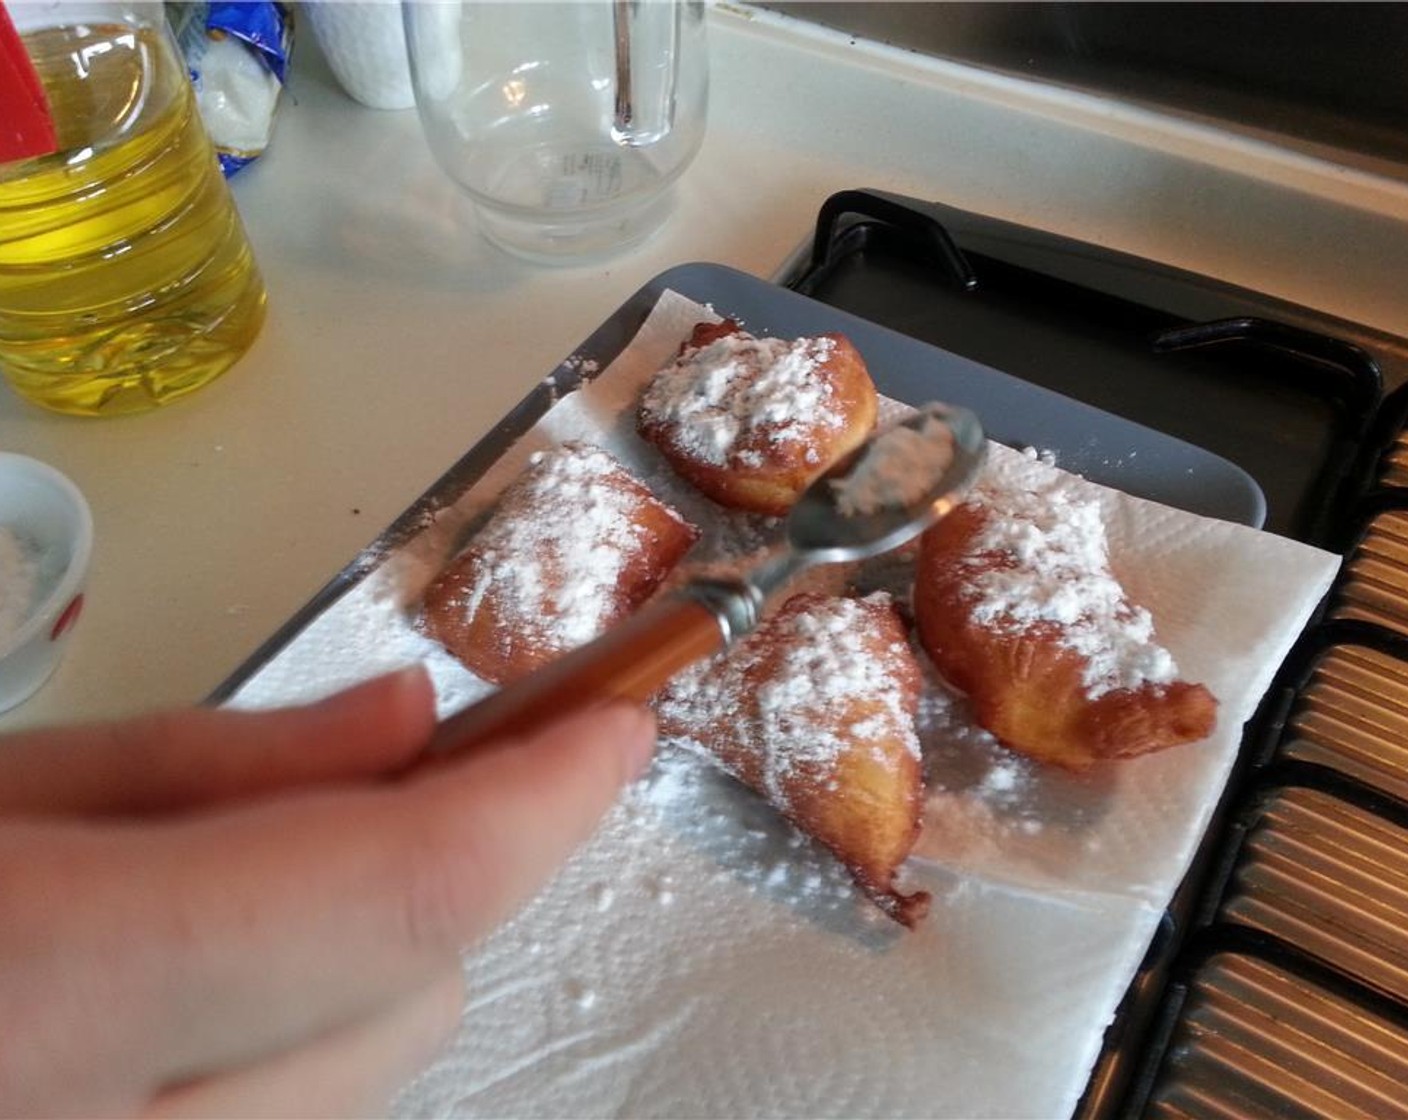 step 10 After beignets are fried, drain them for a few seconds on paper towels, and then toss them into a bag with plenty of Powdered Confectioners Sugar (3 cups) or use a spoon and powder them like you're Tony Montana.